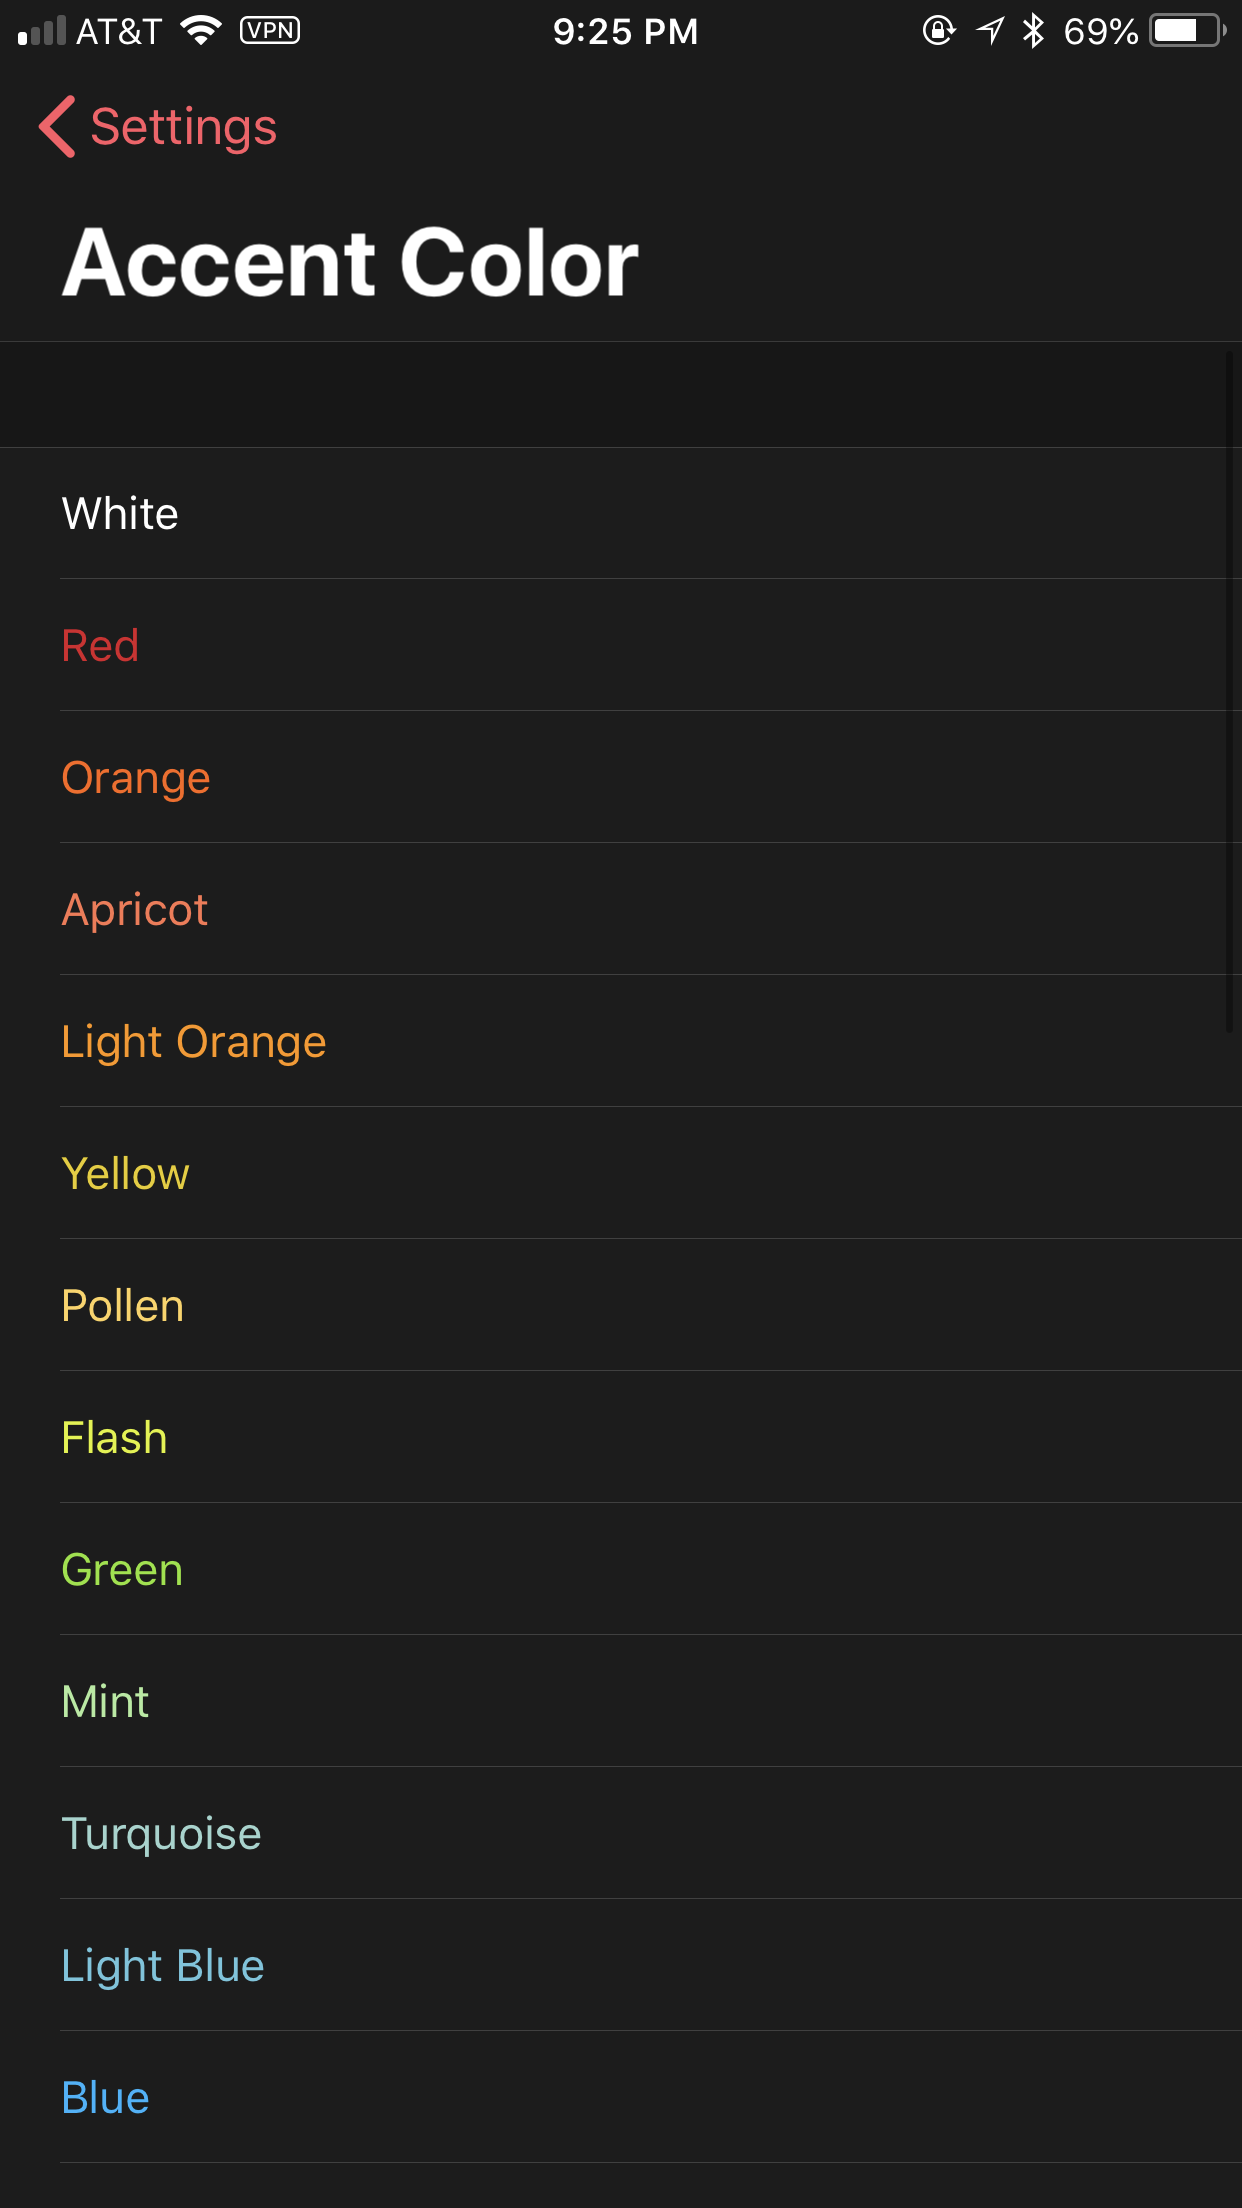 A listing of some of the accent colors available in Better Day